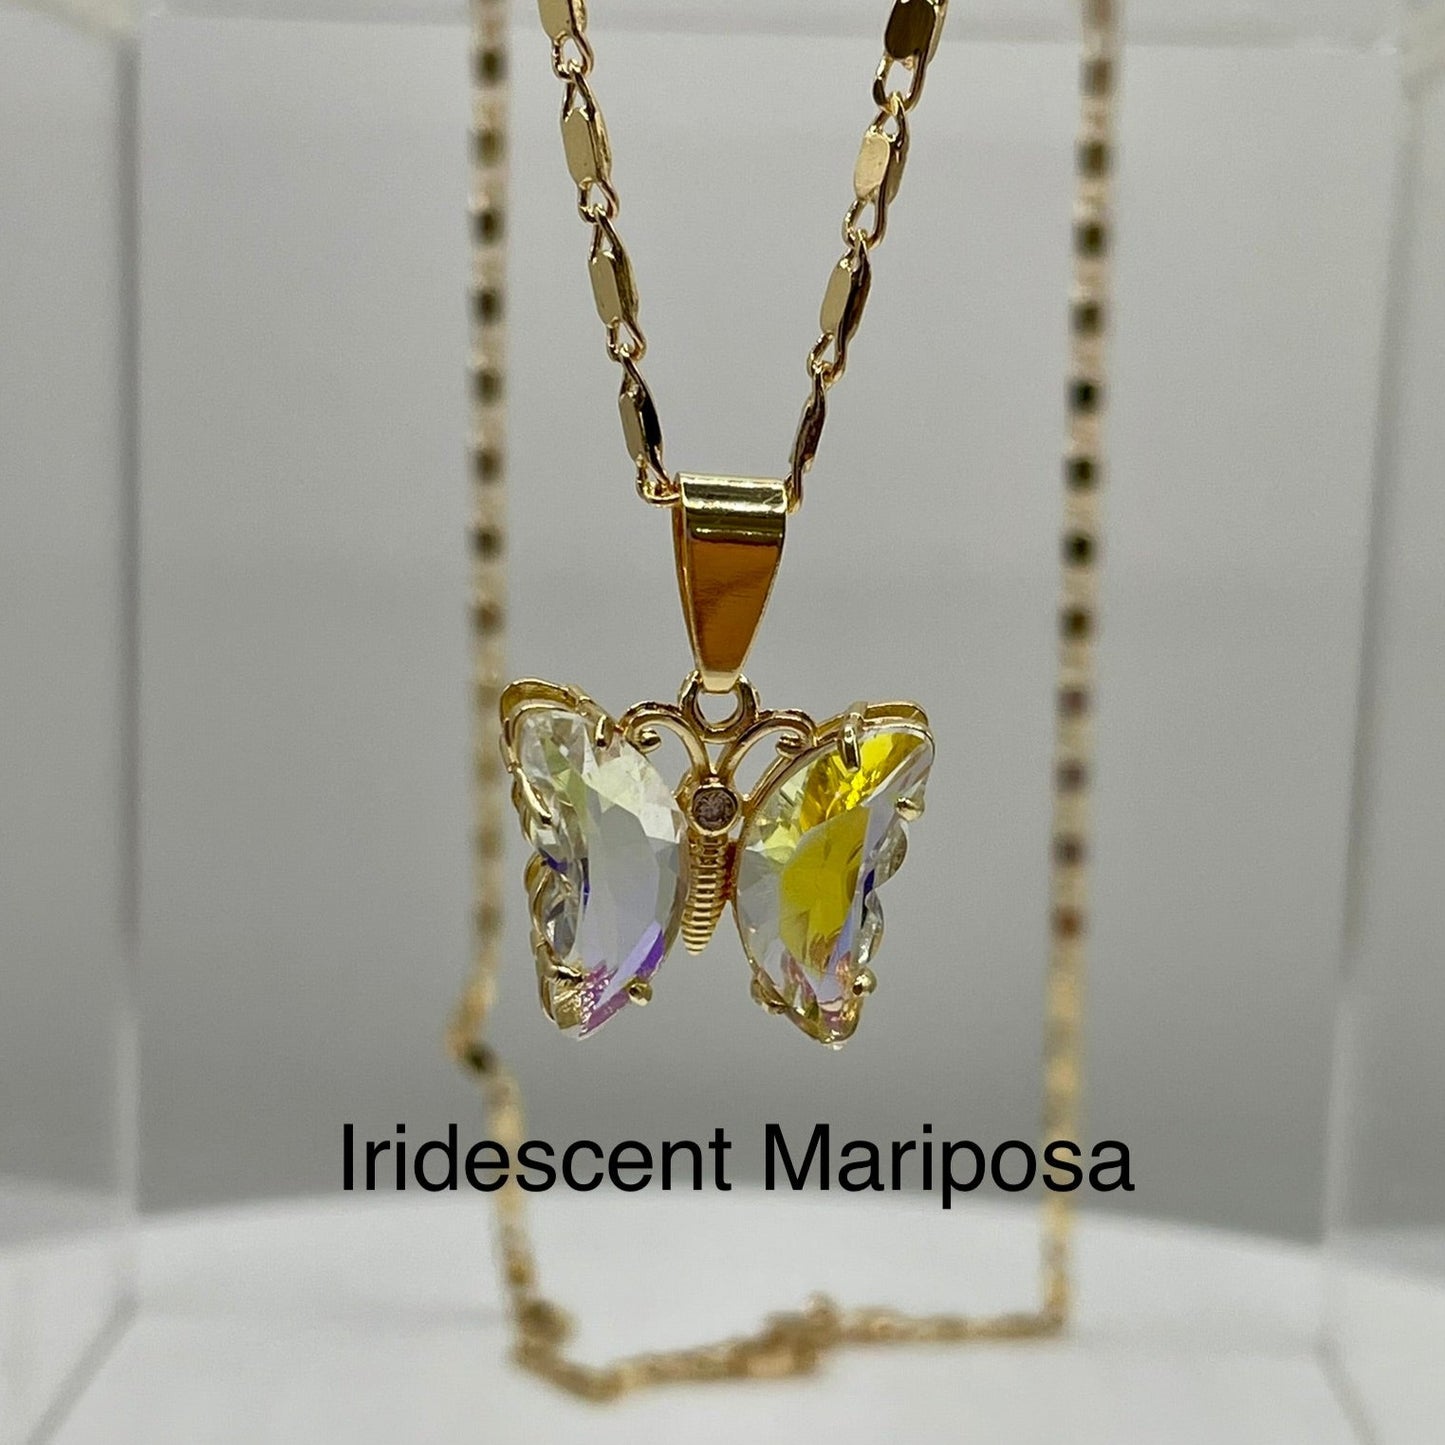 Iridescent butterfly pendant on gold necklace displayed on an acrylic base. Butterfly pendant. iridescent butterfly pendant. Mariposa pendant. Gold plated pendants.